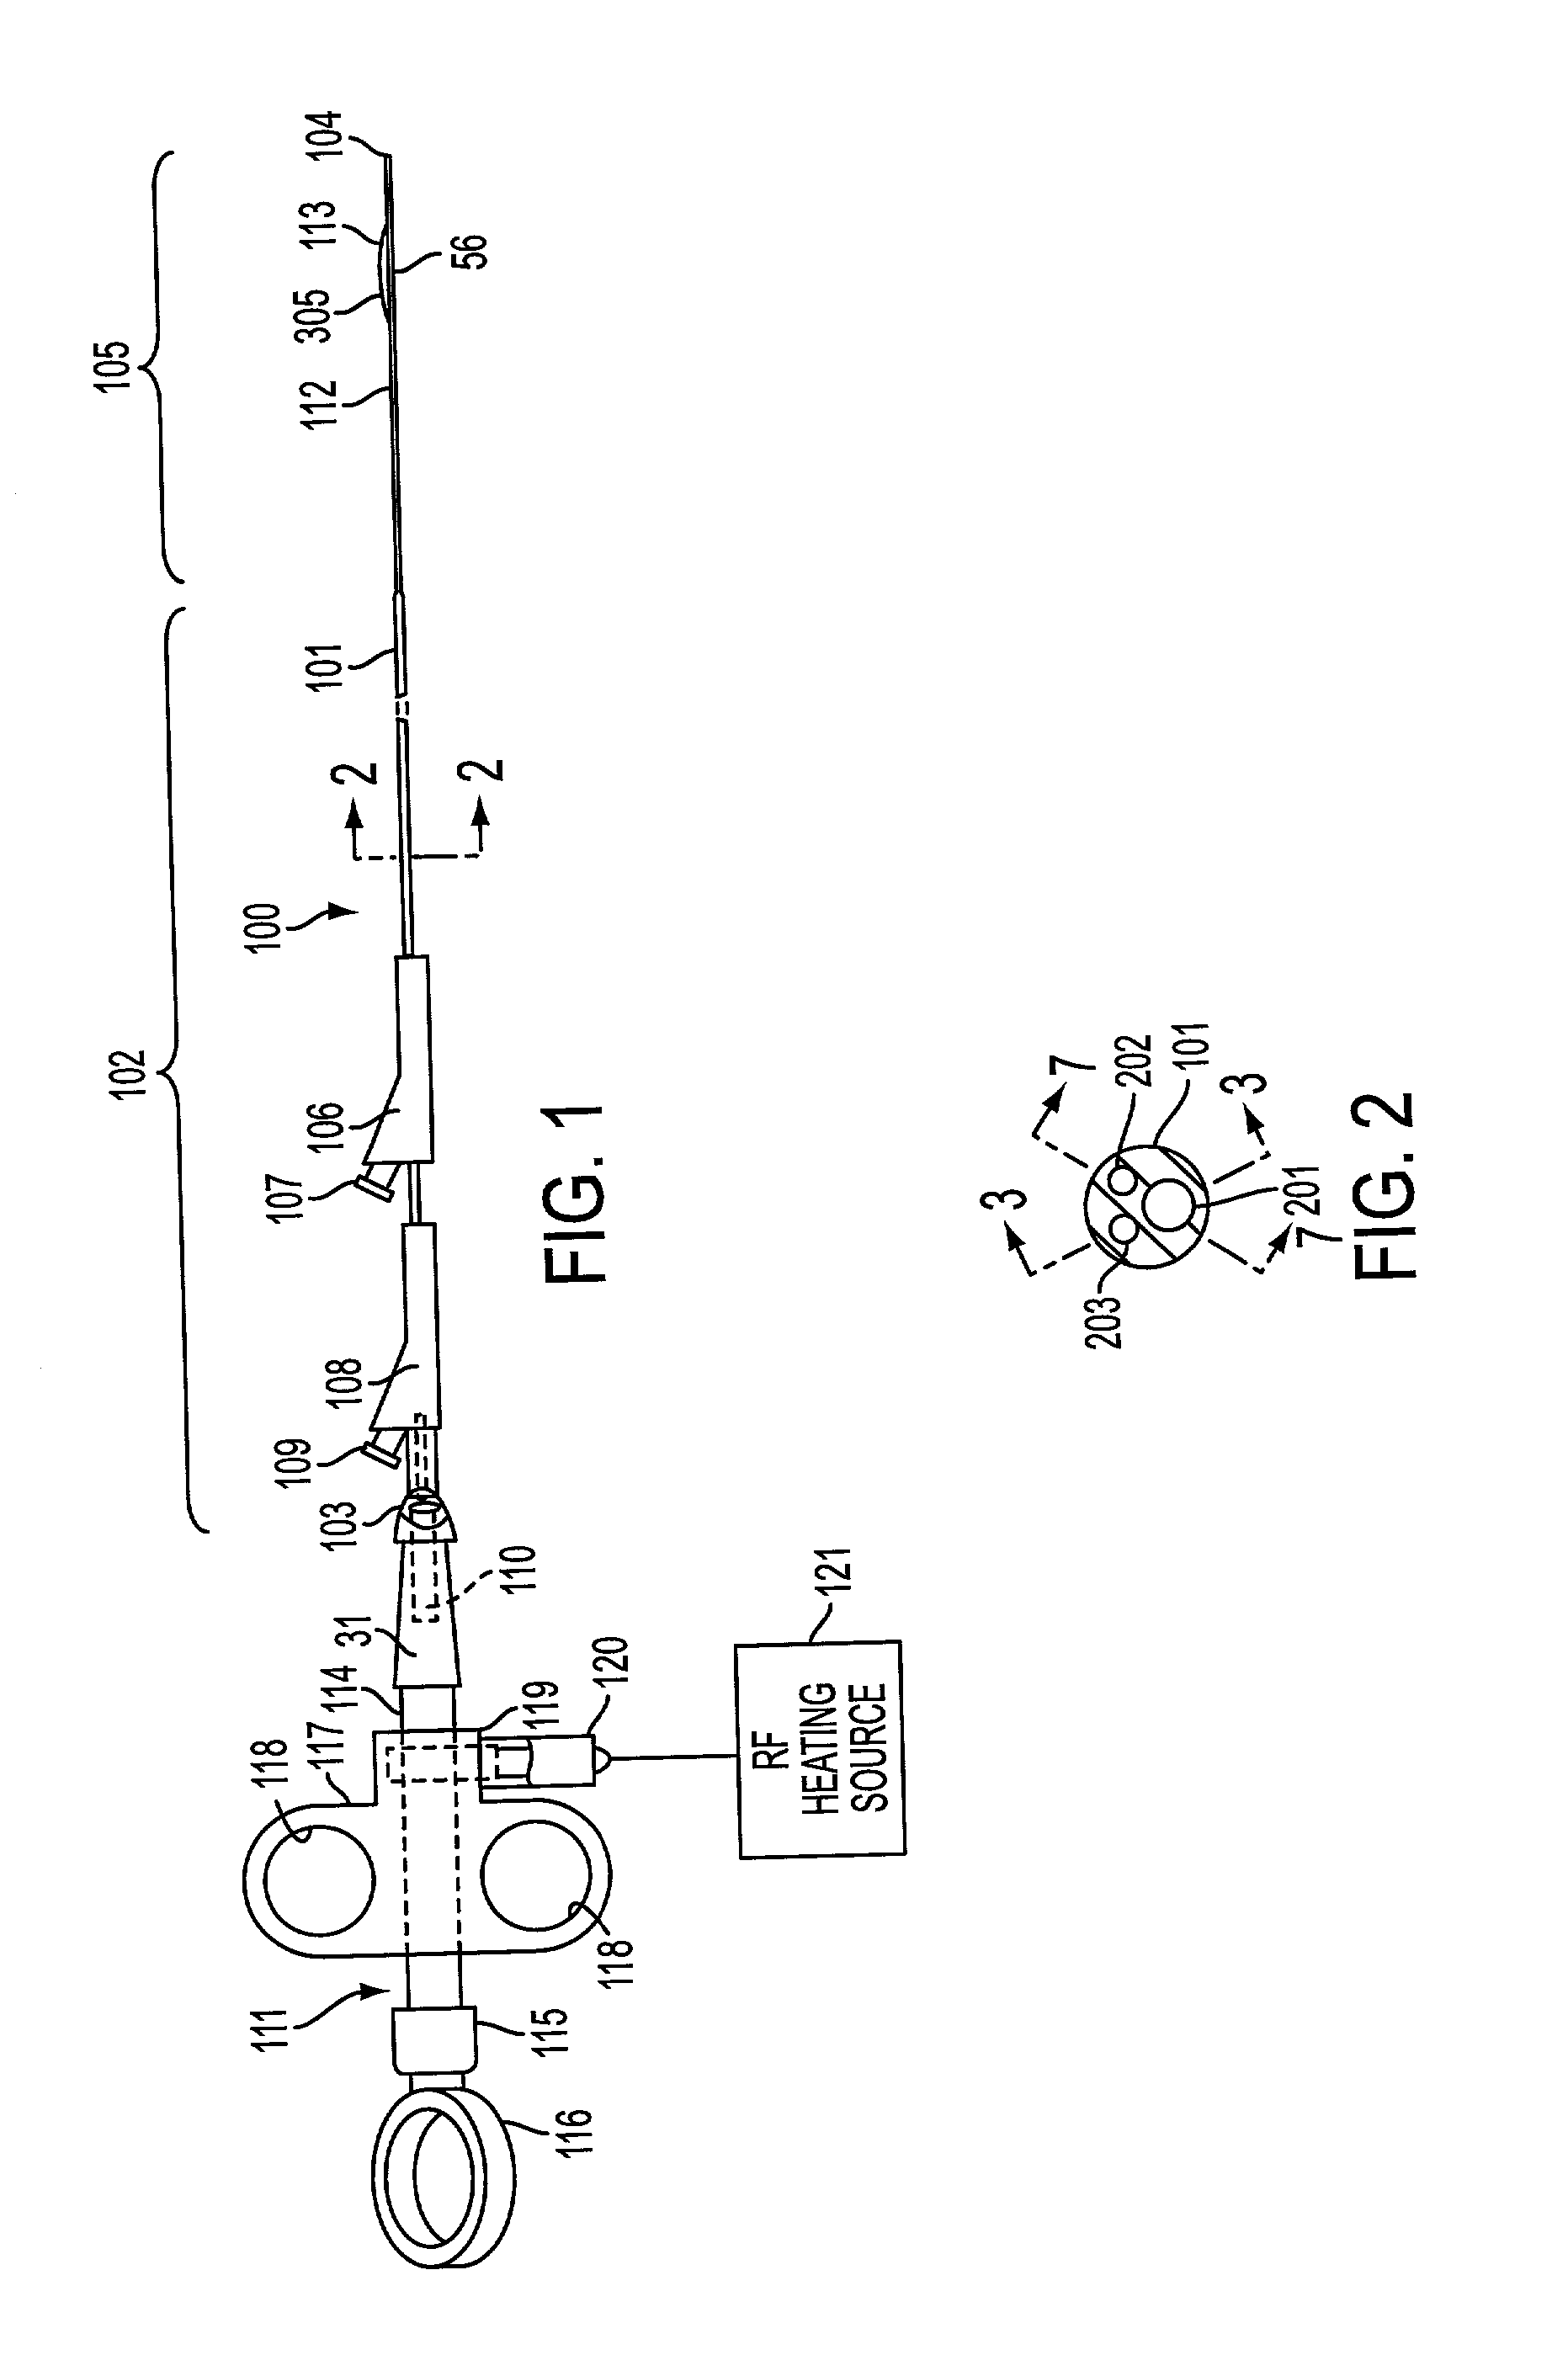 Method and apparatus for measuring and controlling blade depth of a tissue cutting apparatus in an endoscopic catheter